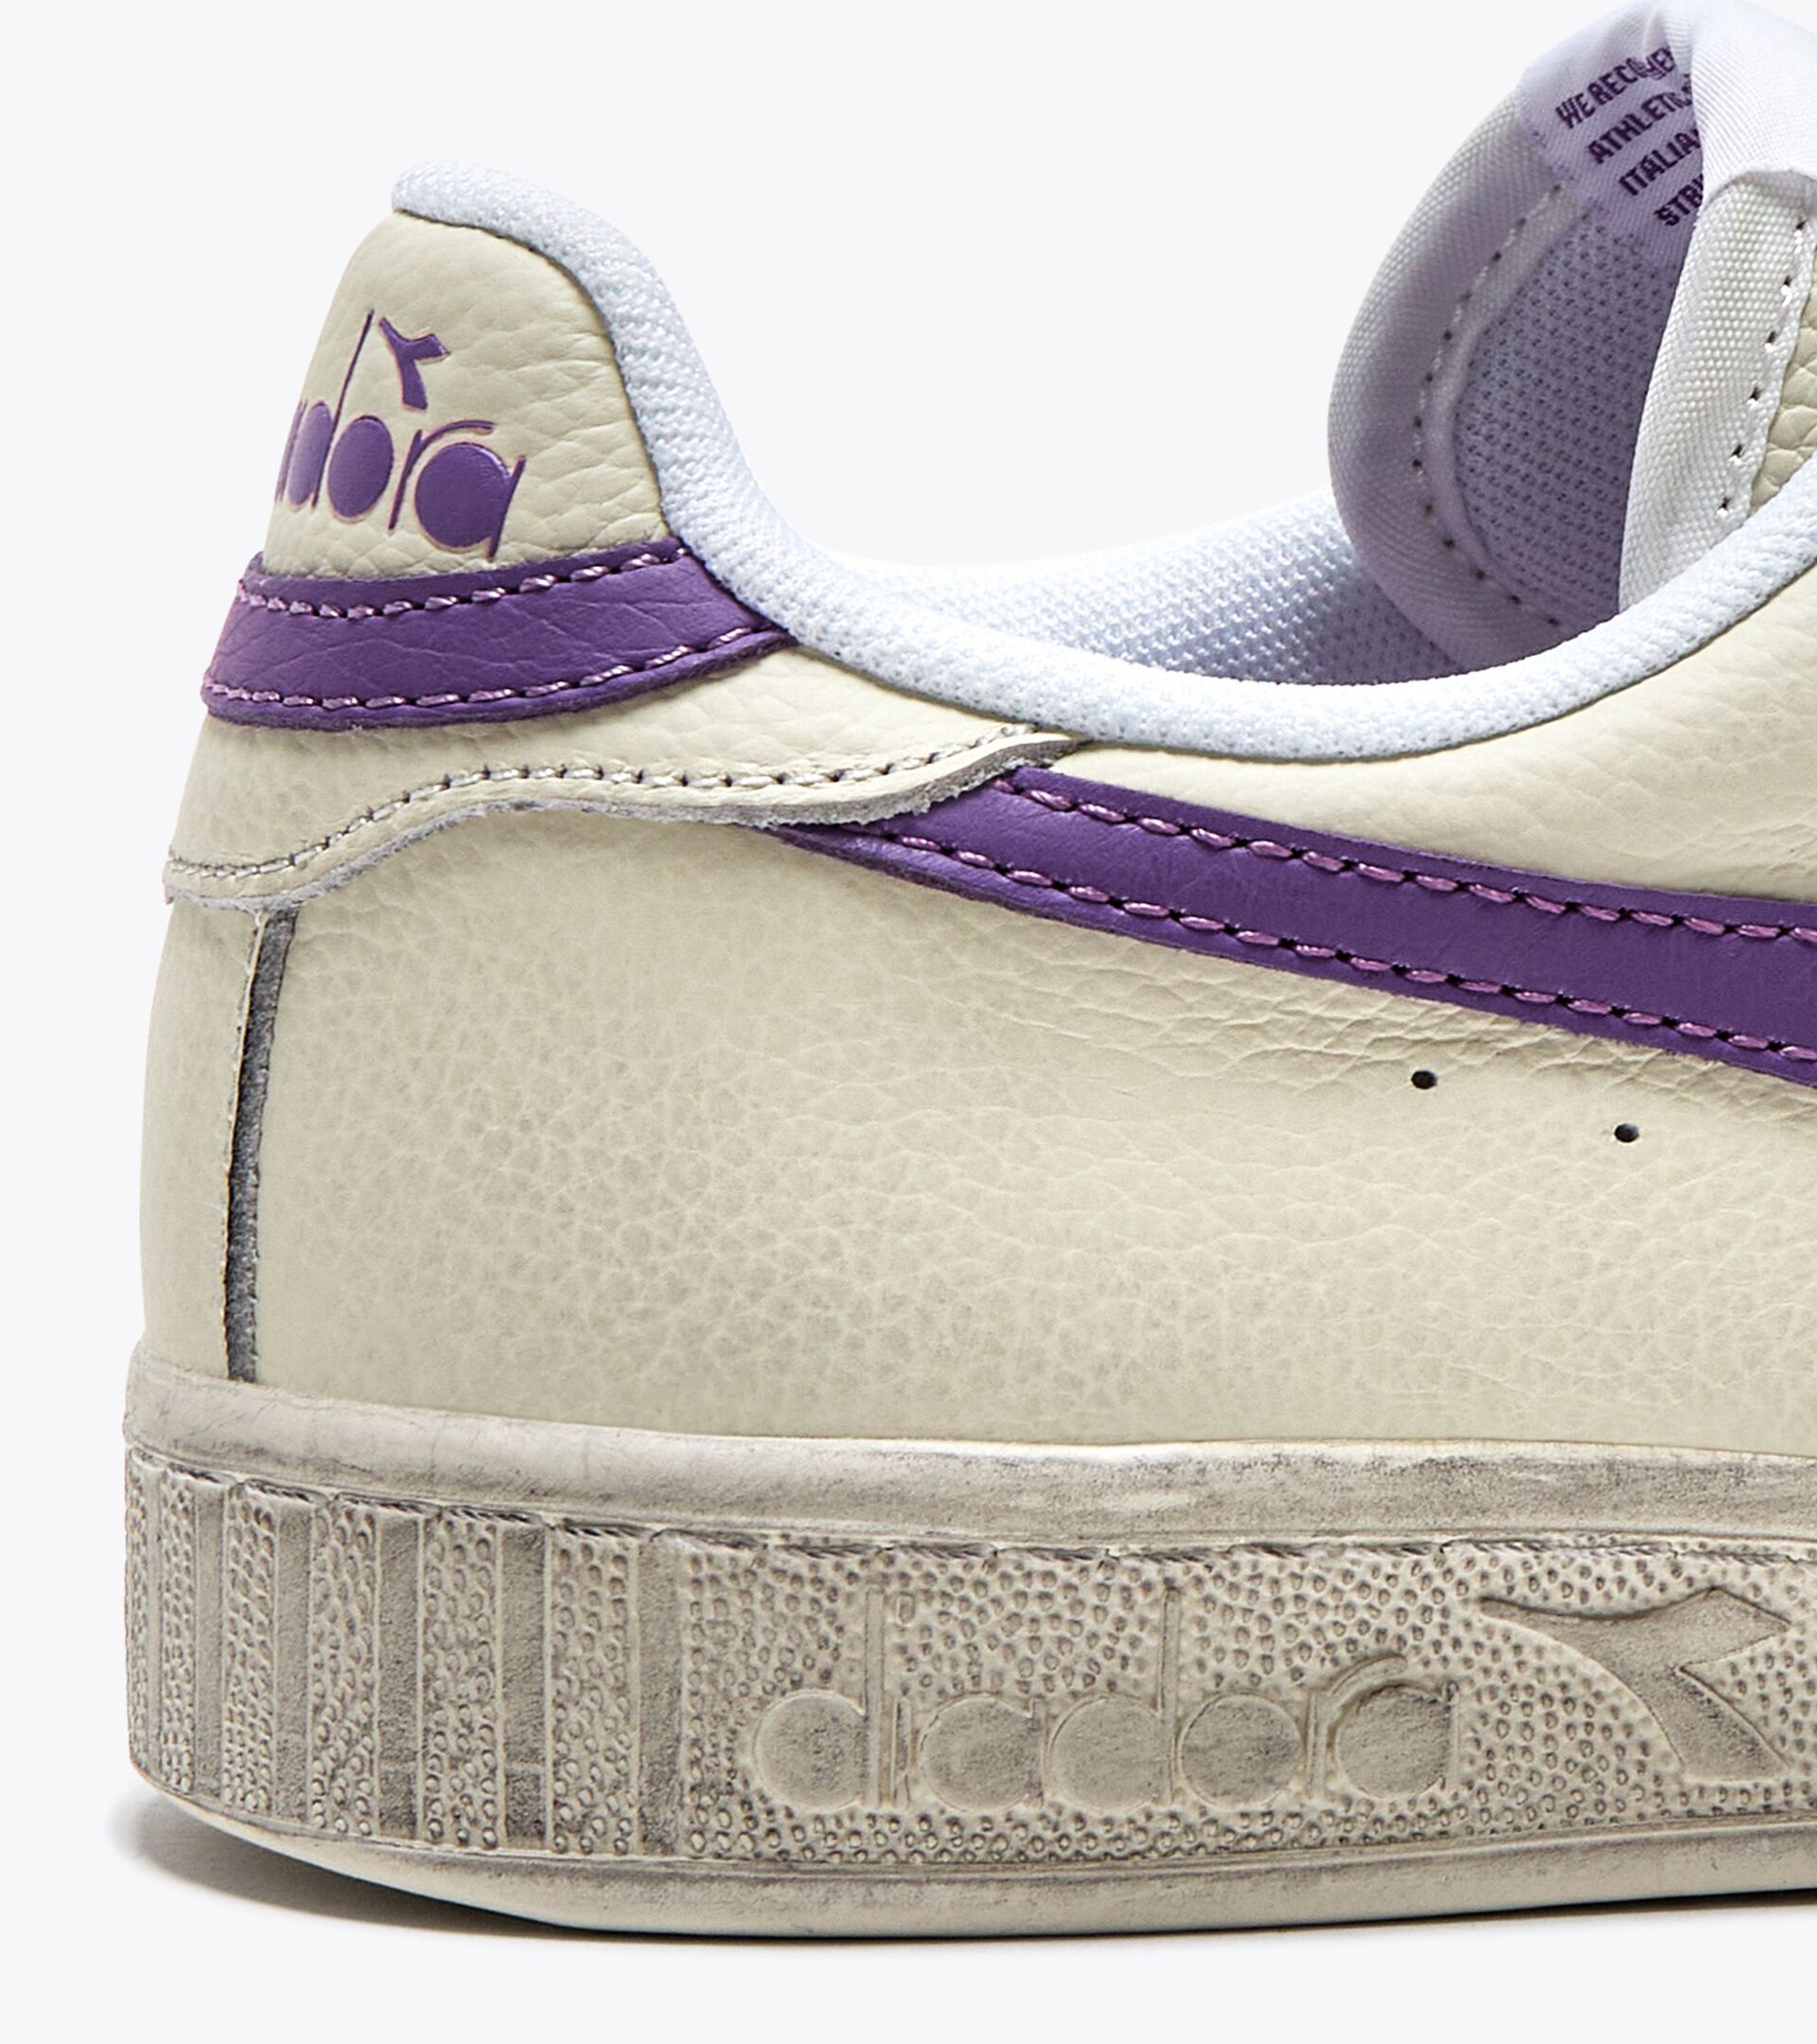 Sporty sneakers - Gender neutral GAME L LOW WAXED WHITE/VIOLET BERRY  (C6210) - Diadora